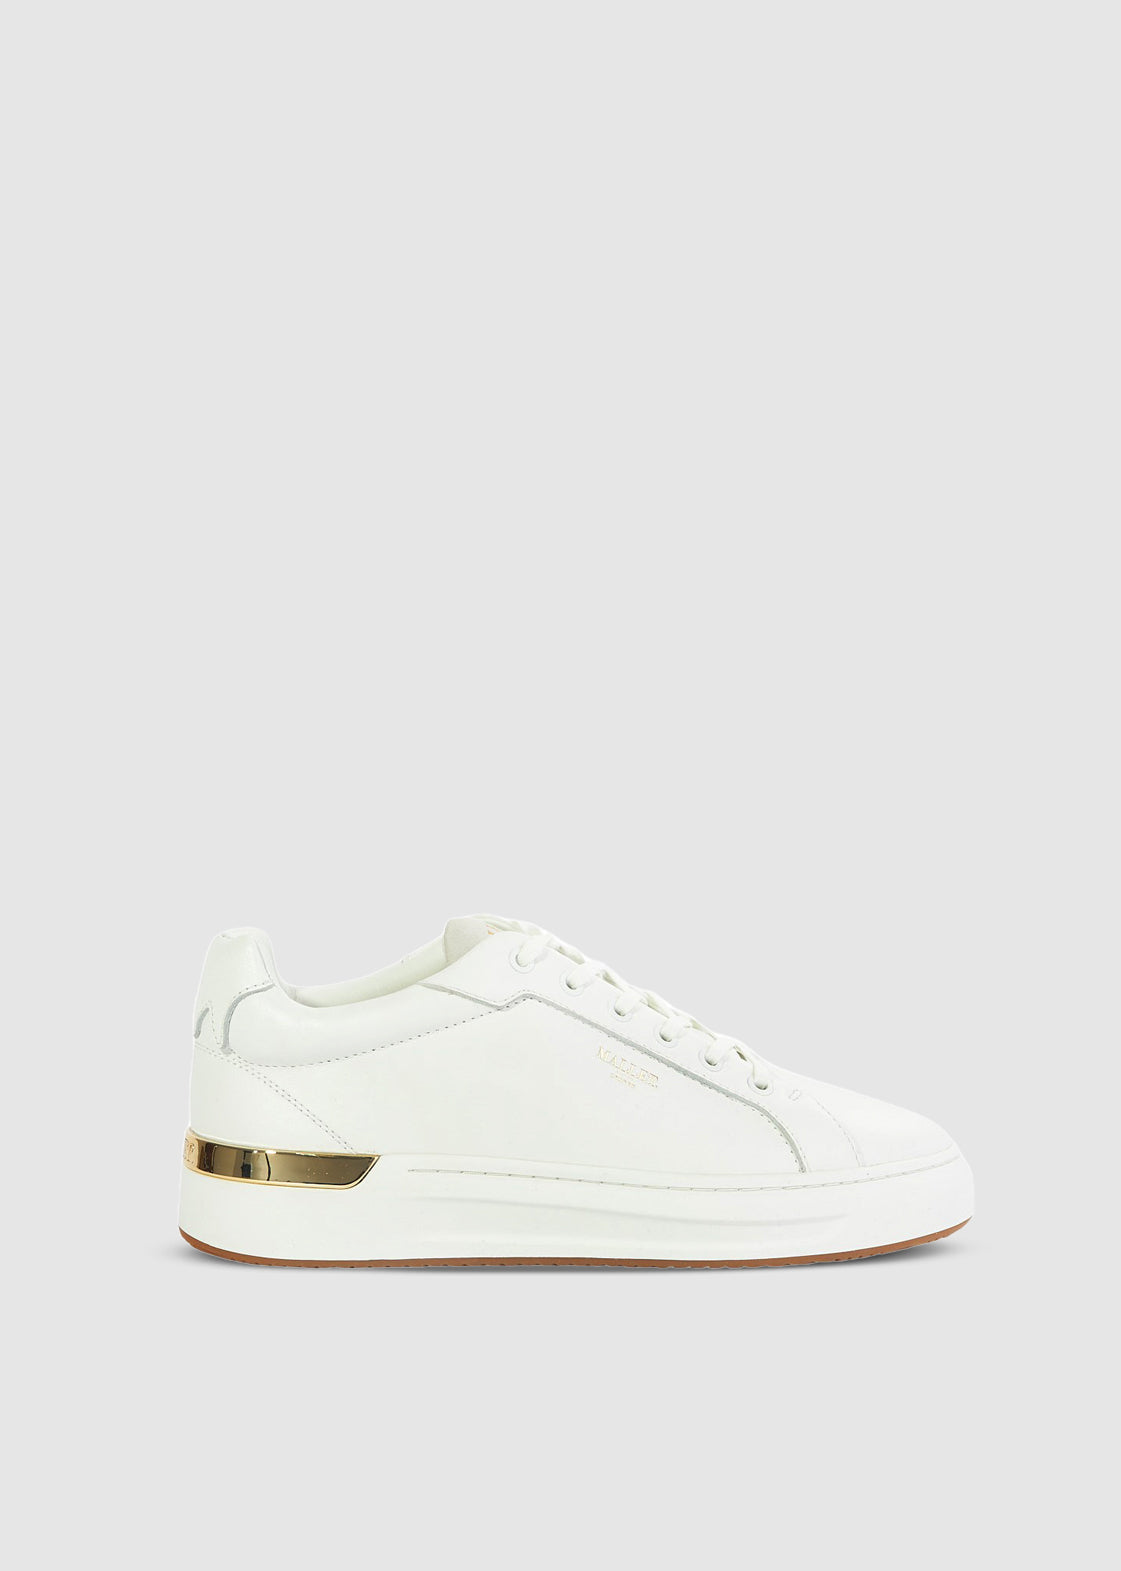 Image of Mallet Mens GRFTR Trainers In White